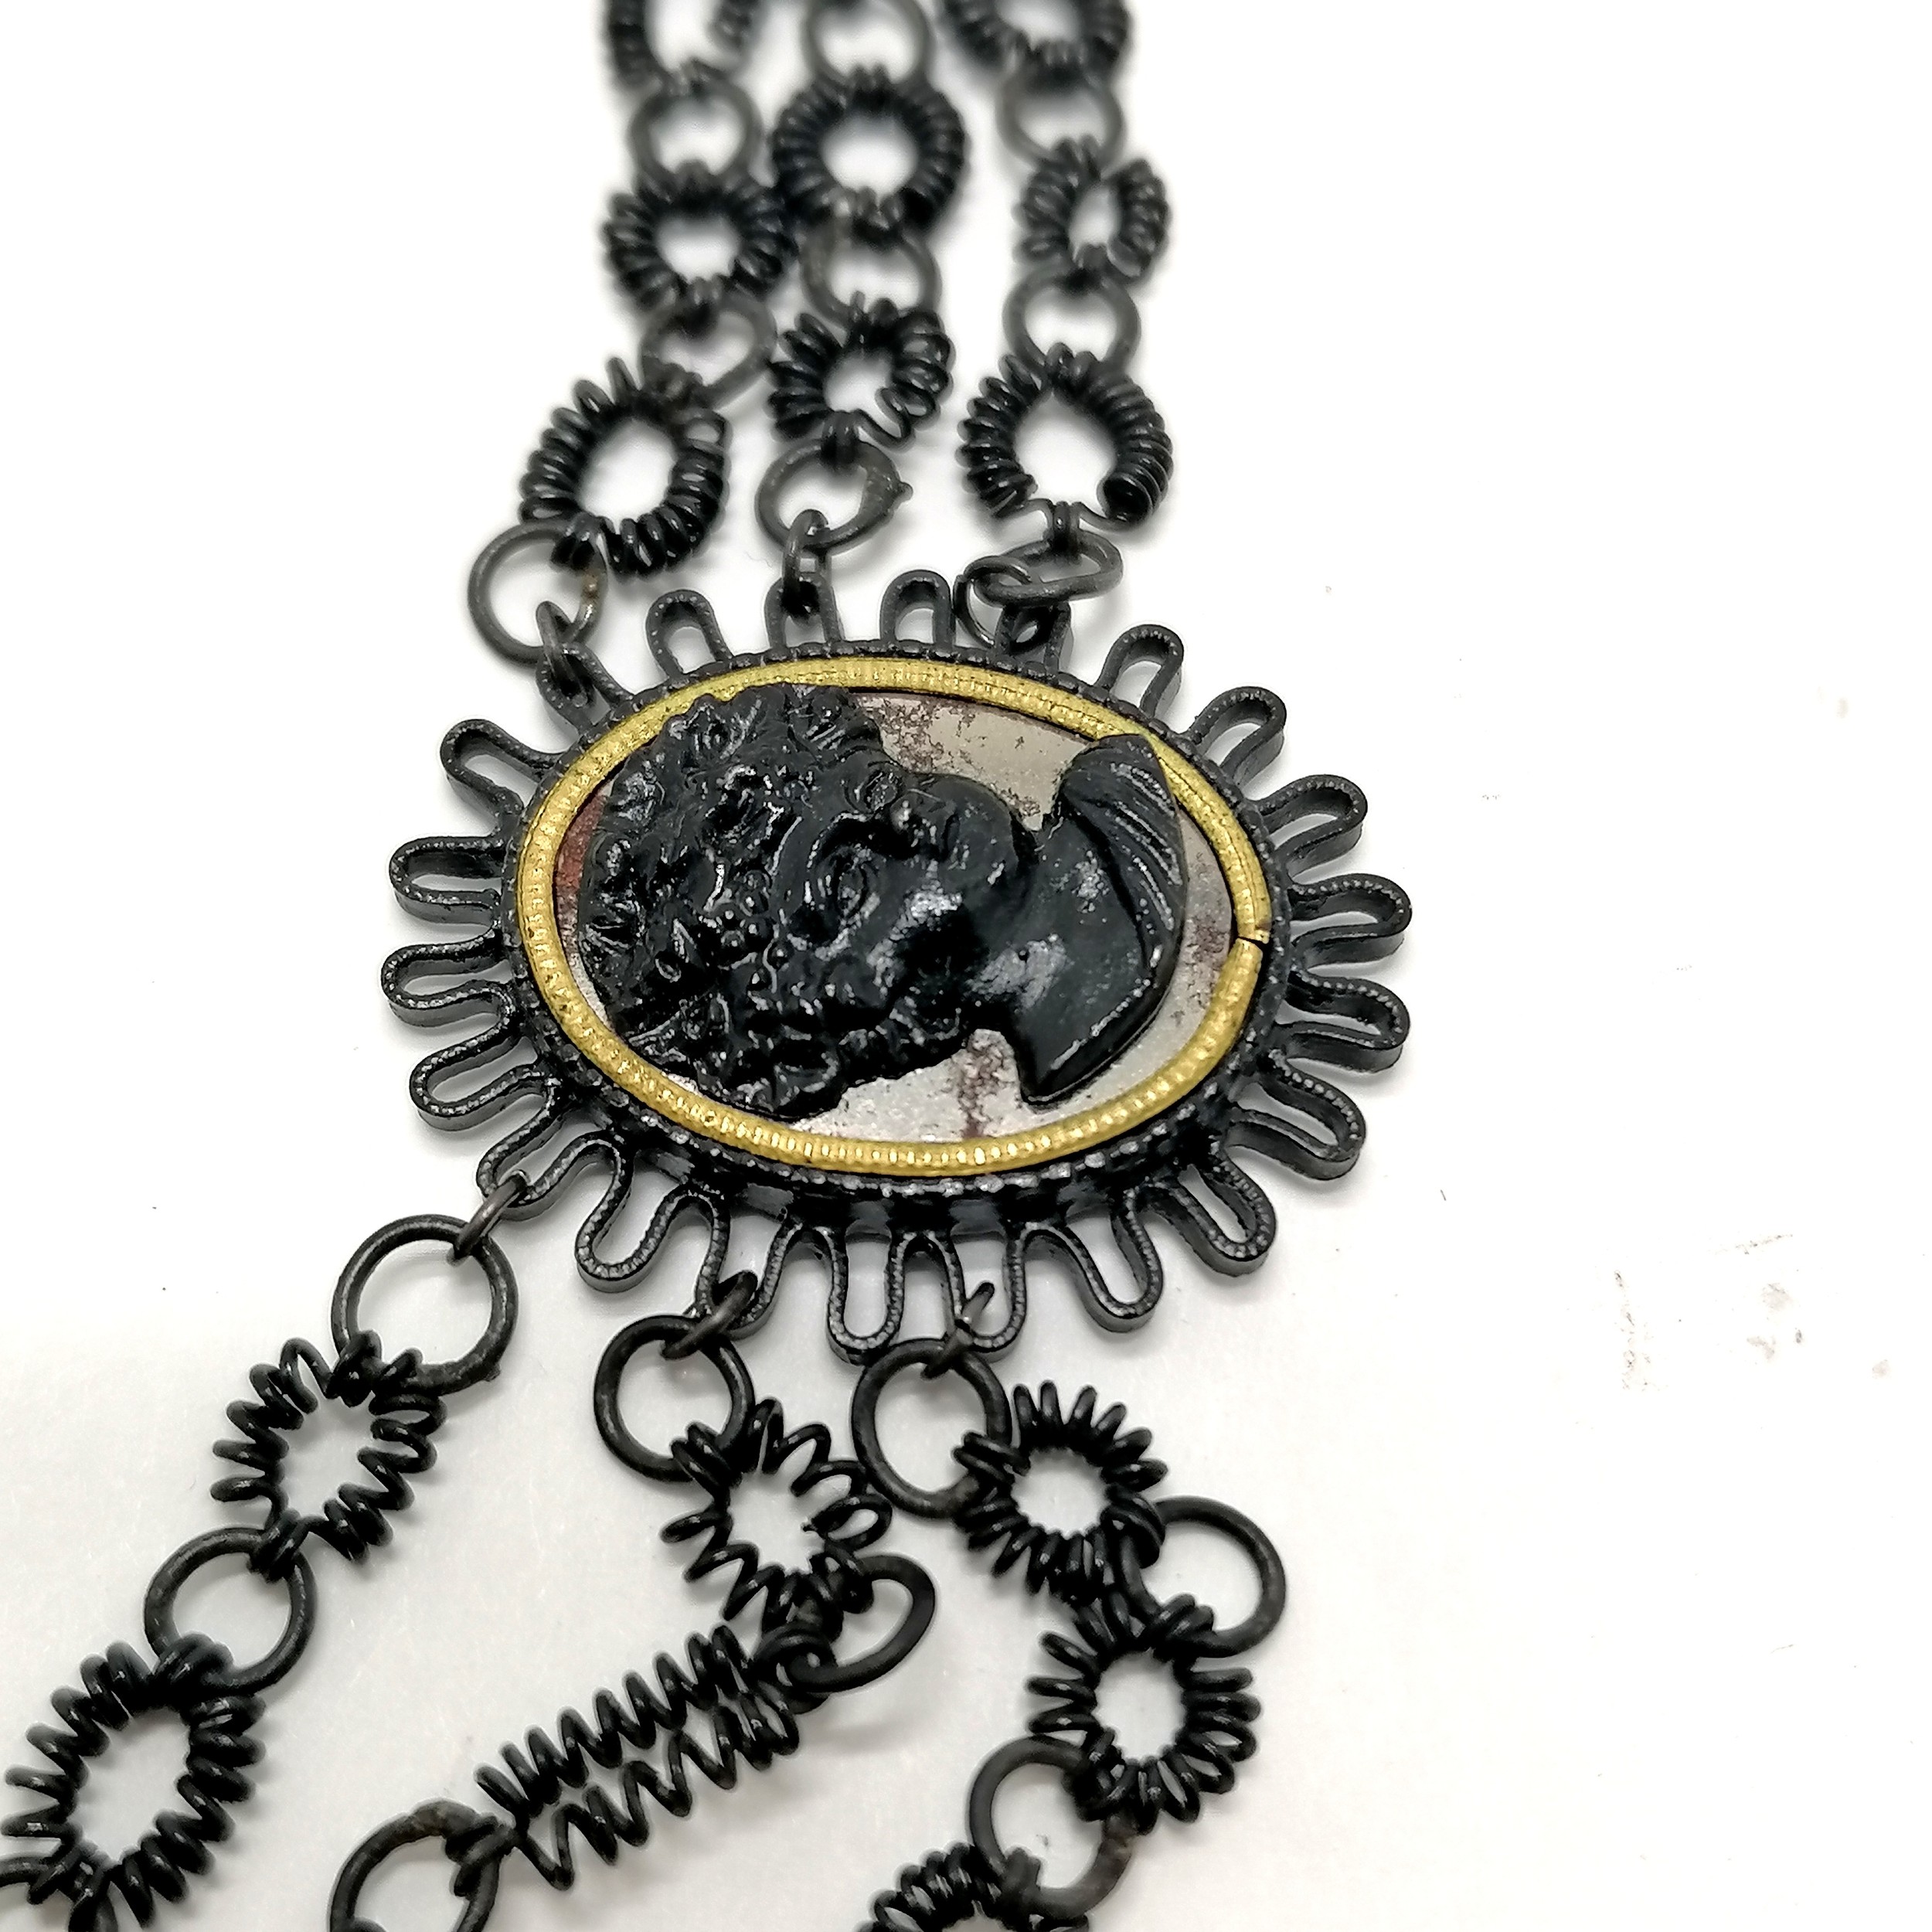 Antique Georgian Grand Tour japanned steel cameo panelled necklace with triple strand design in - Image 5 of 9